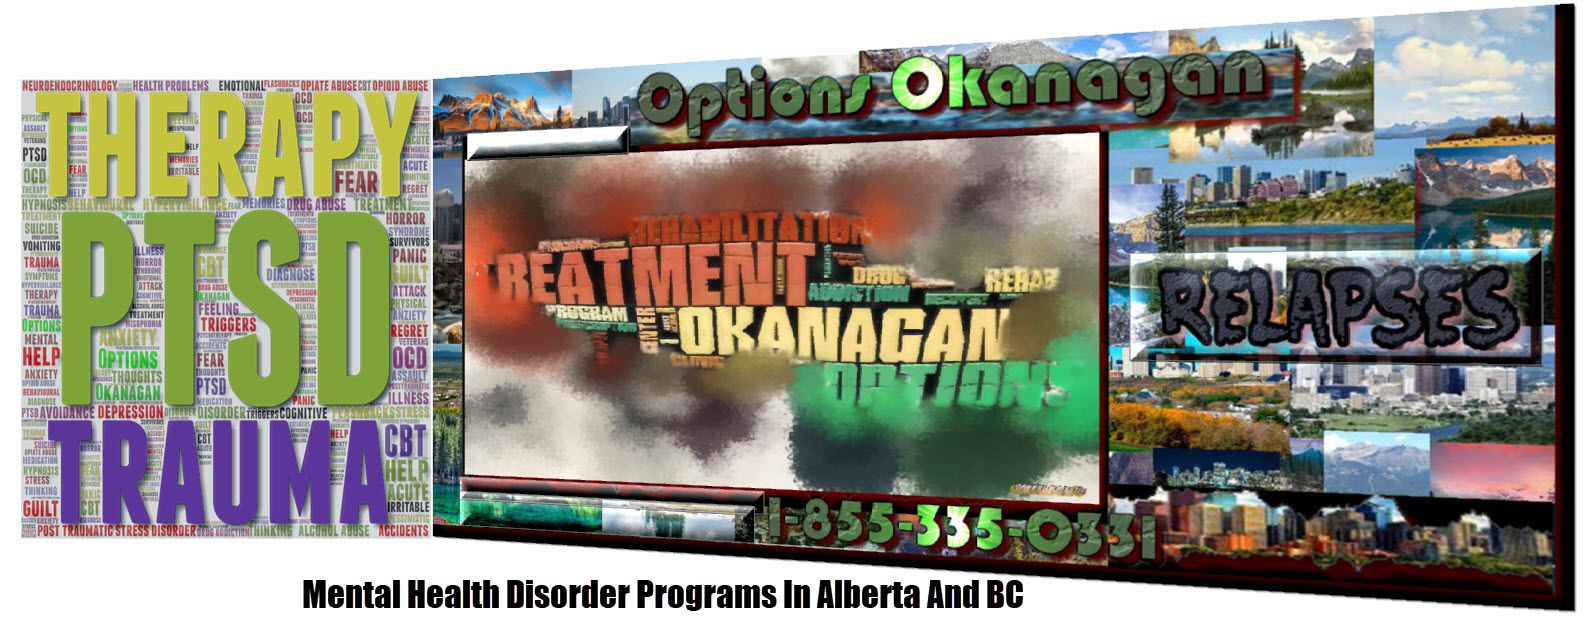 Alcohol and Drug Addiction & Mental Health Disorder Programs and Addiction Aftercare Programs in Lethbridge, Medicine Hat, Fort McMurray, Red Deer, Edmonton and Calgary, Alberta